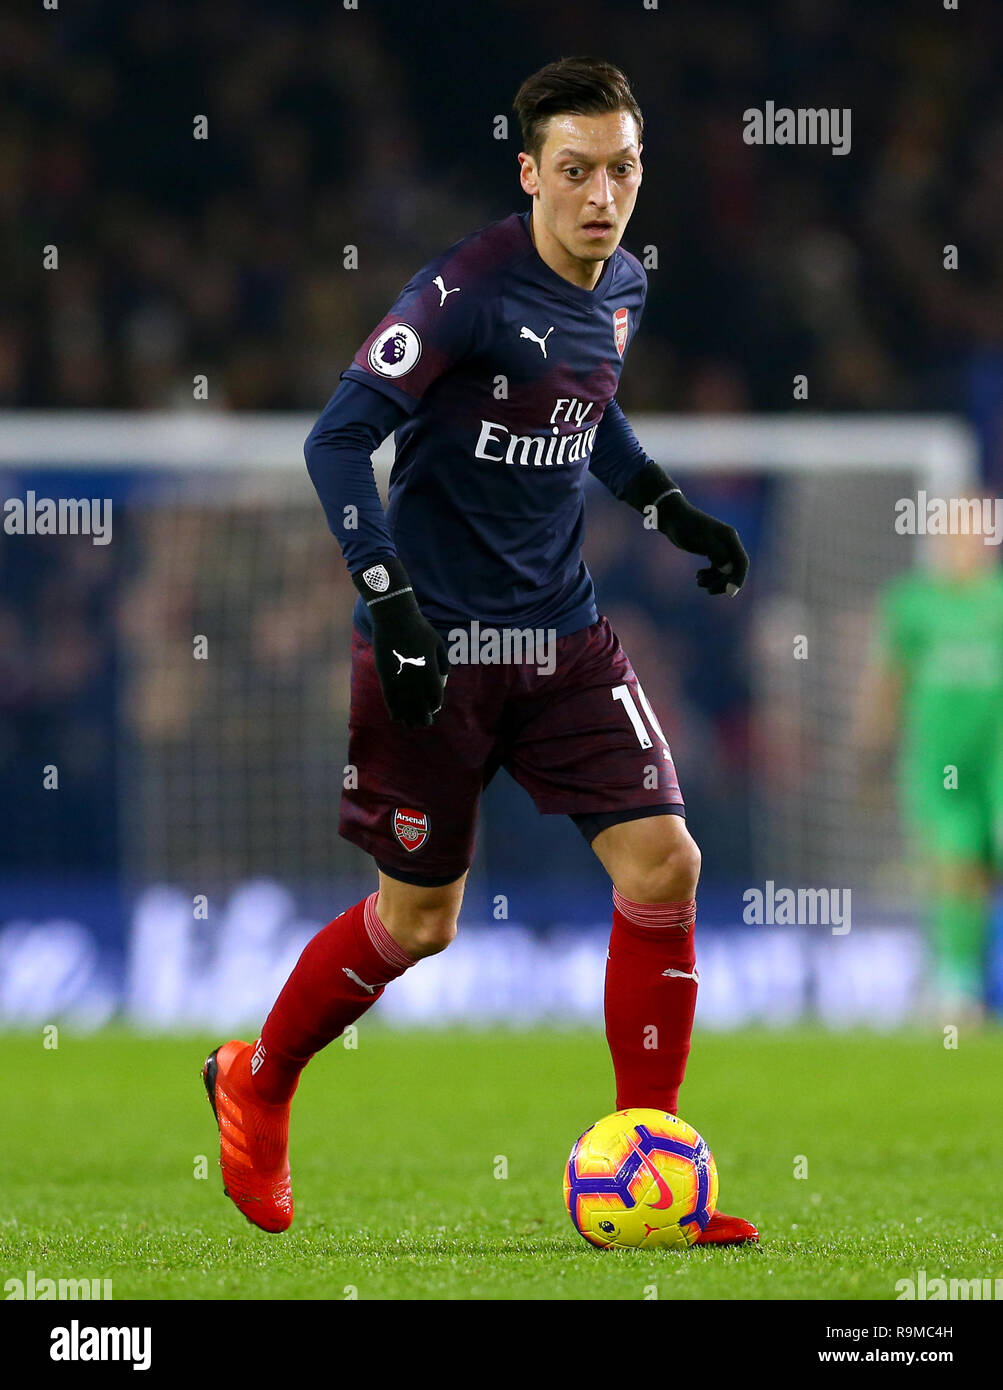 Arsenal's Mesut Ozil during the Premier League match at the AMEX Stadium, Brighton. PRESS ASSOCIATION Photo. Picture date: Wednesday December 26, 2018. See PA story SOCCER Brighton. Photo credit should read: Gareth Fuller/PA Wire. RESTRICTIONS: No use with unauthorised audio, video, data, fixture lists, club/league logos or 'live' services. Online in-match use limited to 120 images, no video emulation. No use in betting, games or single club/league/player publications. Stock Photo